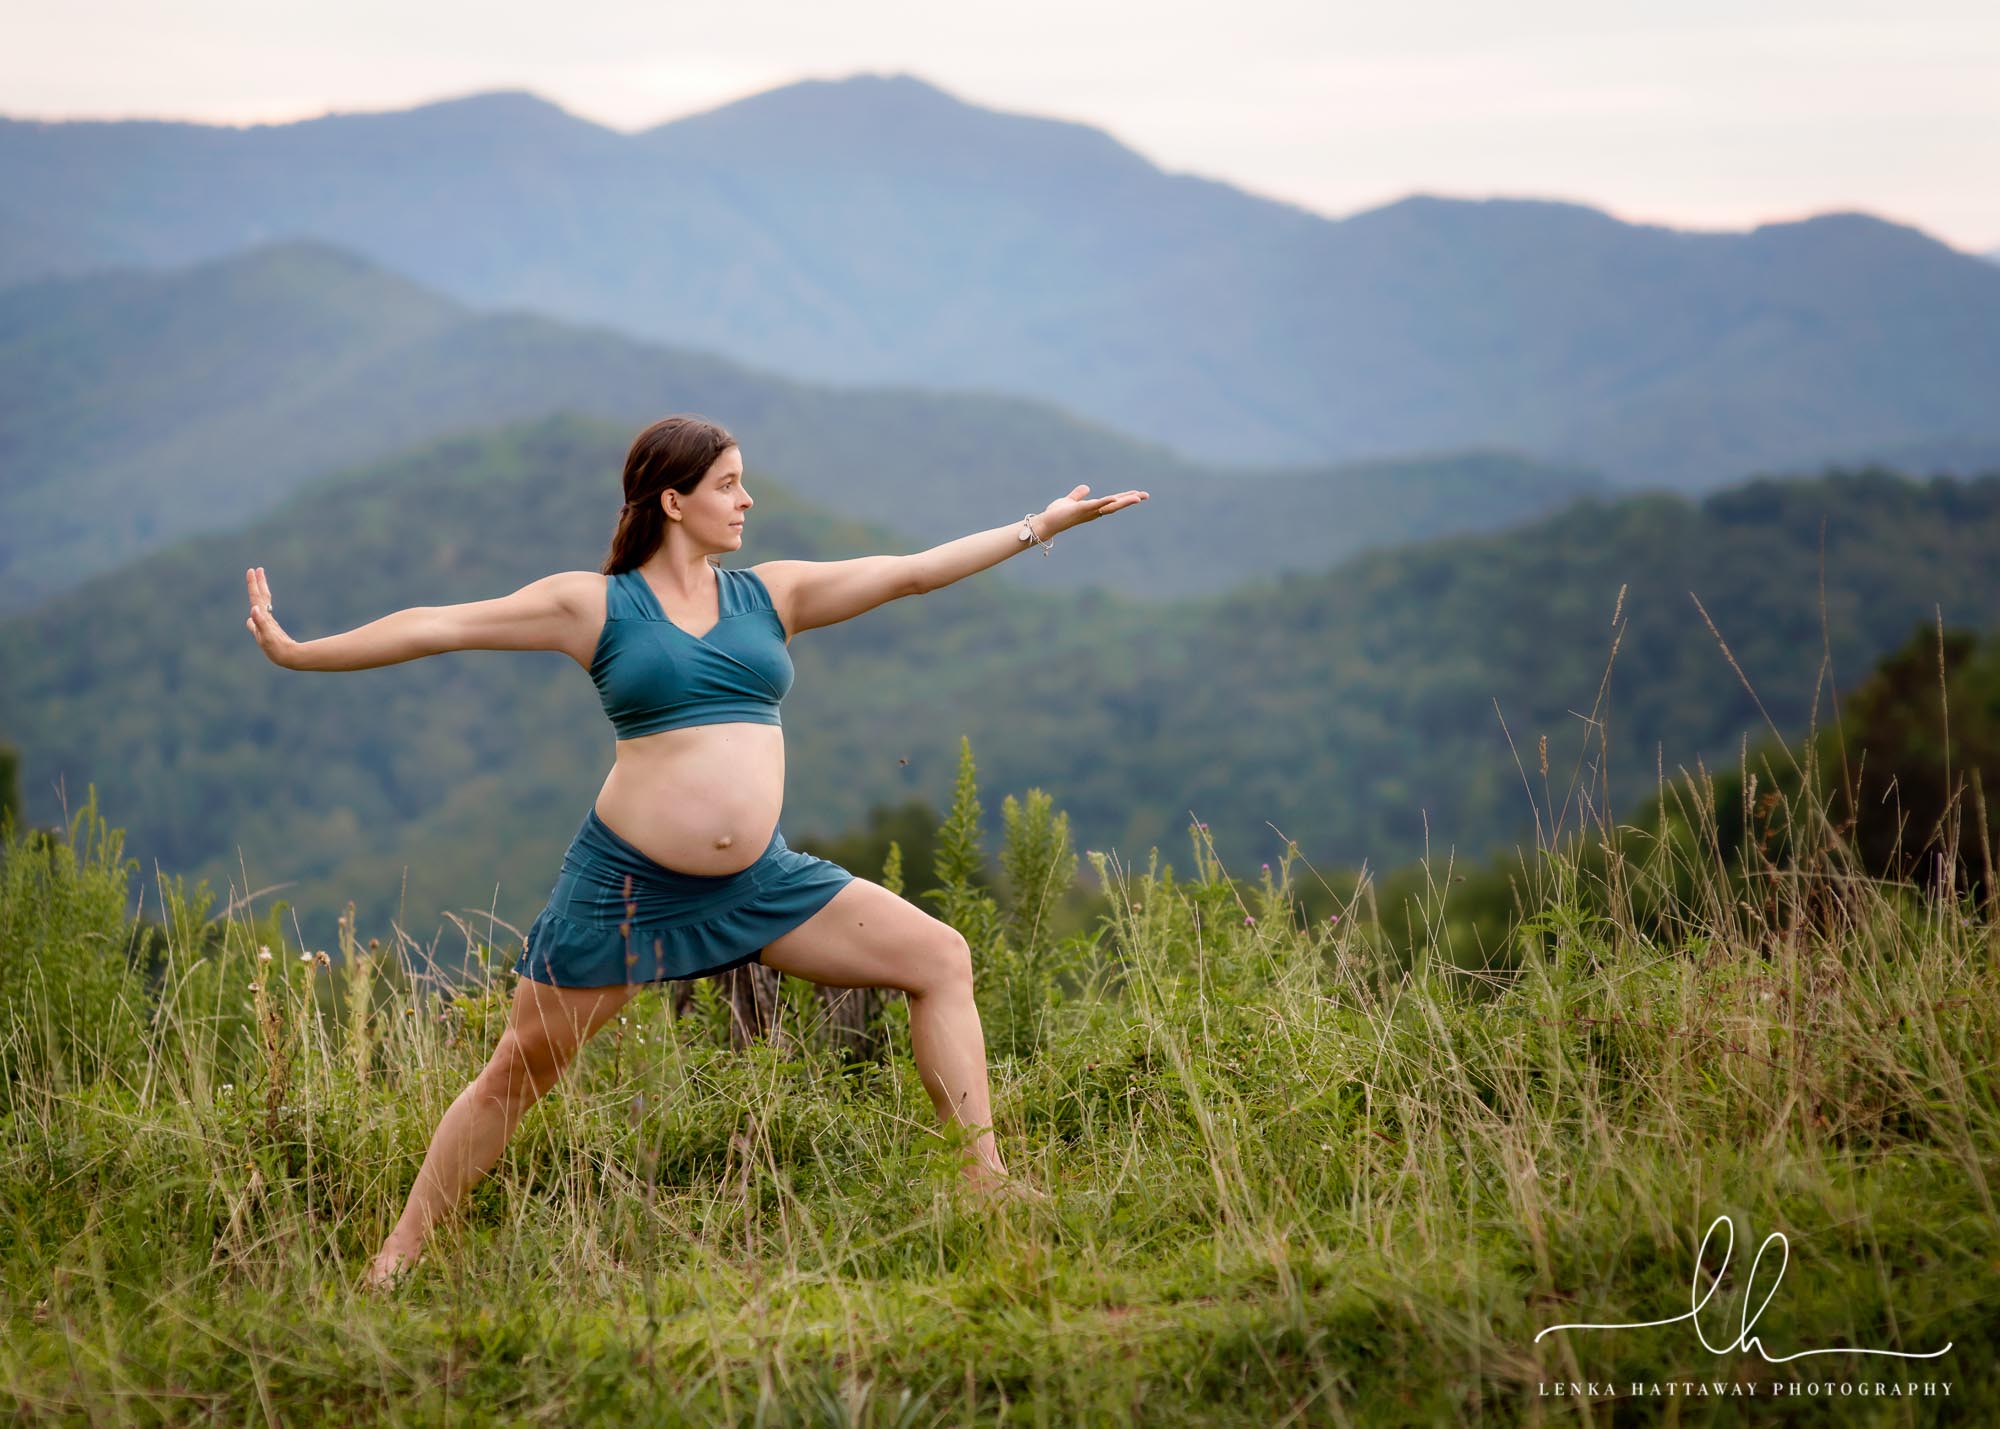 Pregnant mom doing yoga with mountains in the background.